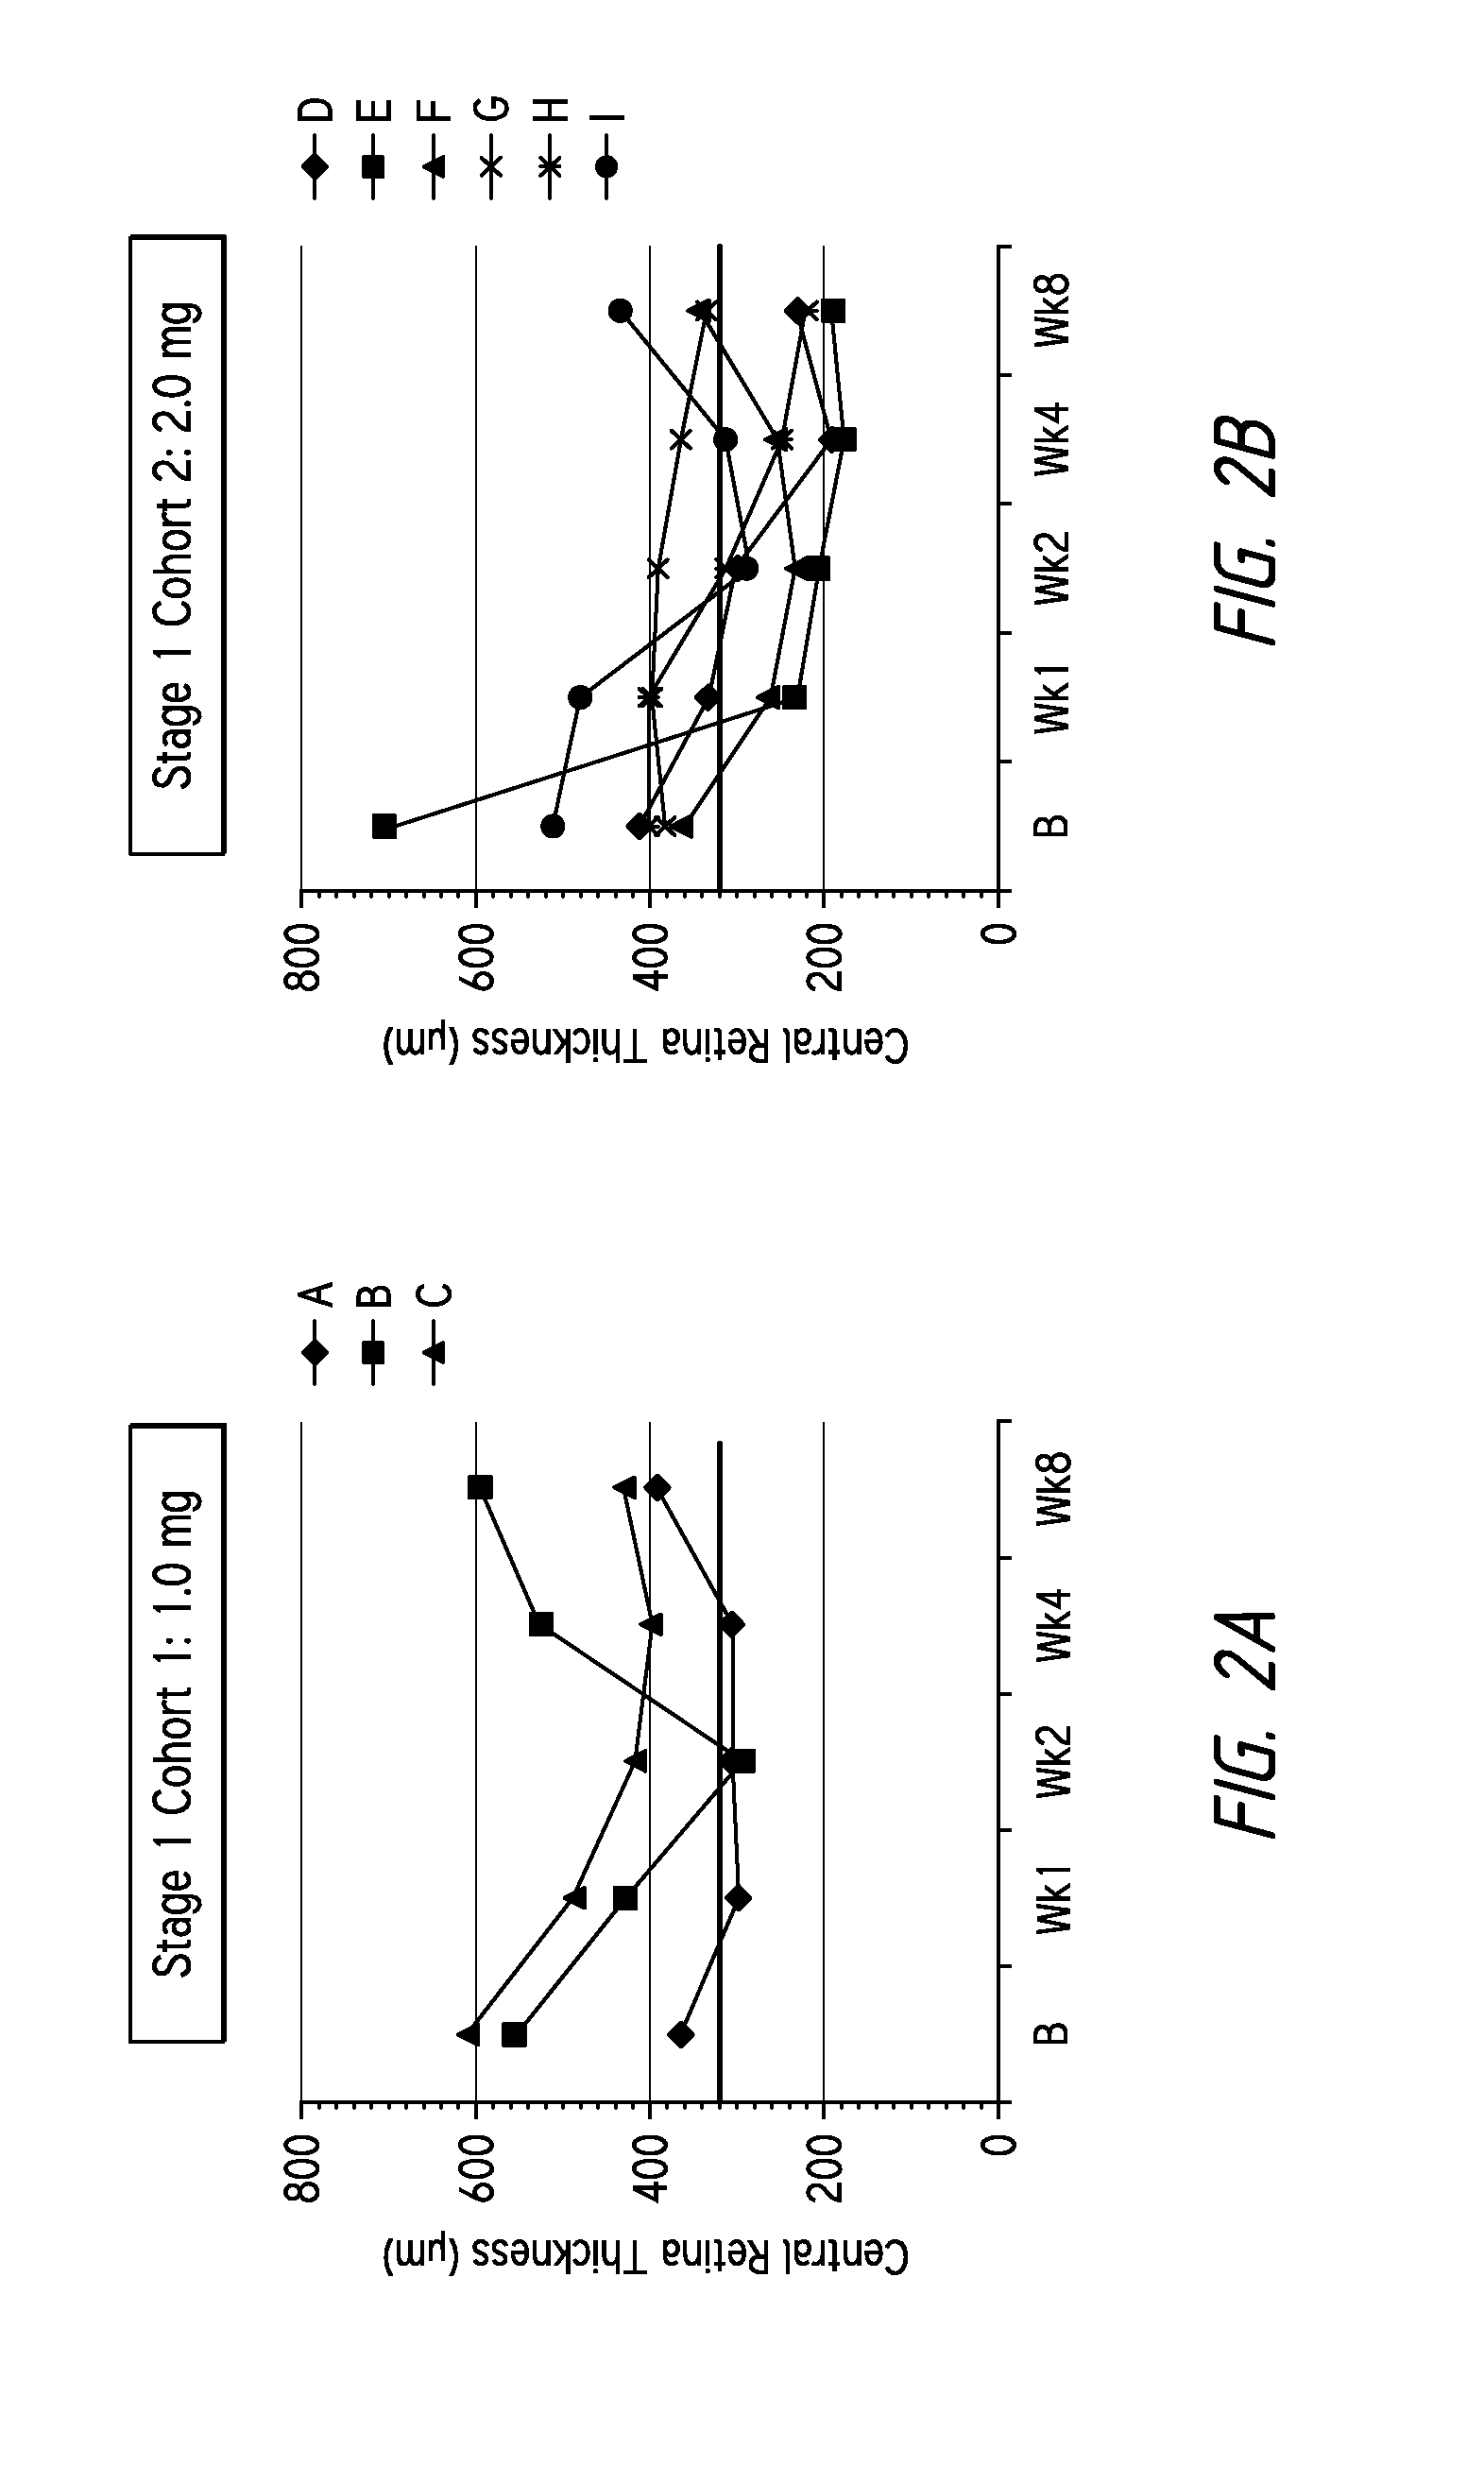 Method of treating AMD in patients refractory to Anti-vegf therapy